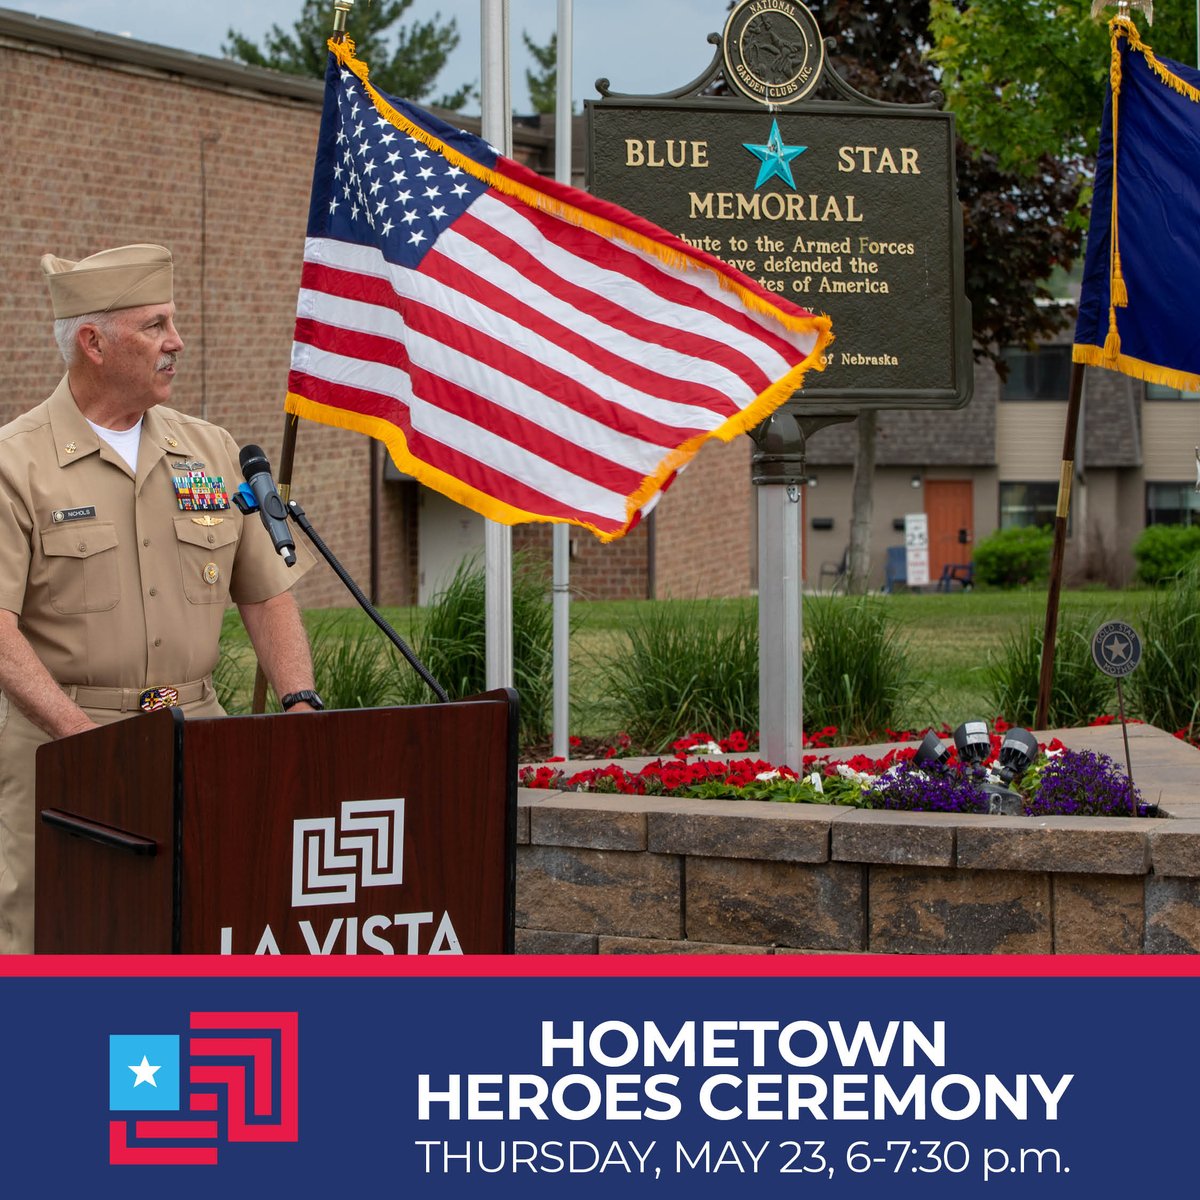 You're invited! Gather to remember heroes from our community. La Vista's Hometown Heroes Ceremony will be Thursday, May 23 at 6 p.m. outside City Hall. American Legion Post 32, Papillion-La Vista High School musicians, La Vista Police and Mayor Kindig will honor the fallen.